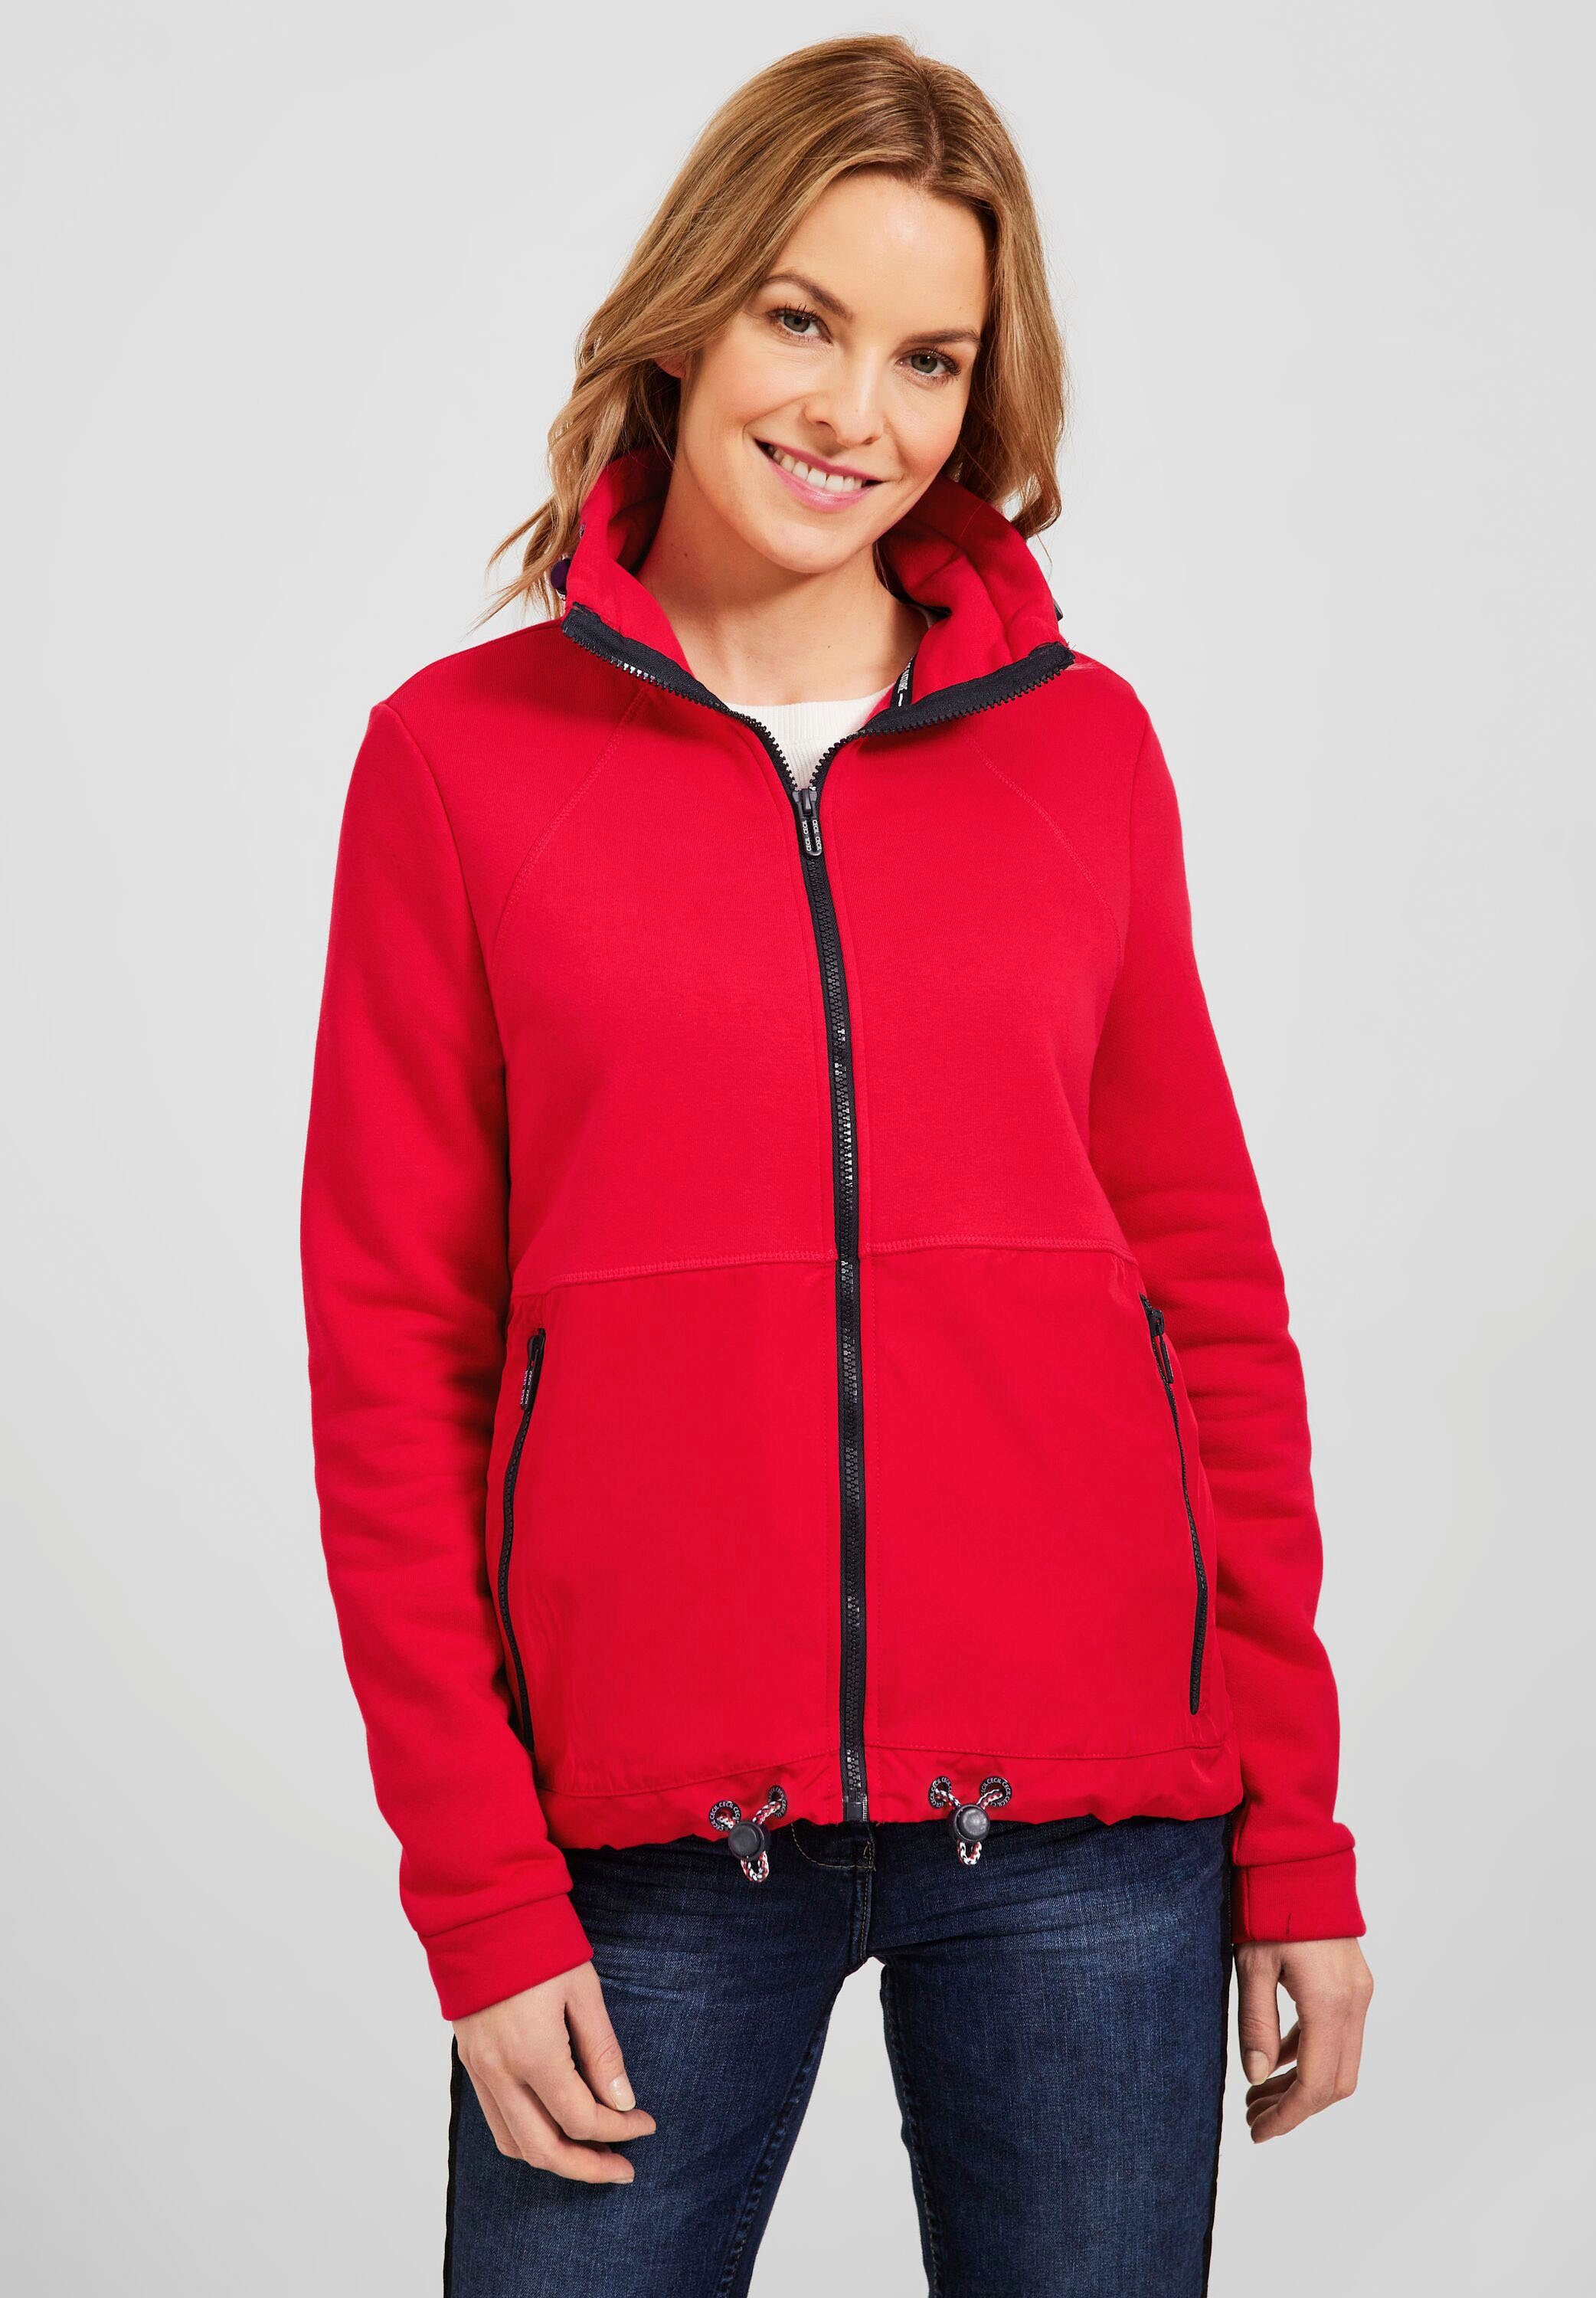 Cecil Sweatjacke im modernen red strong Materialmix